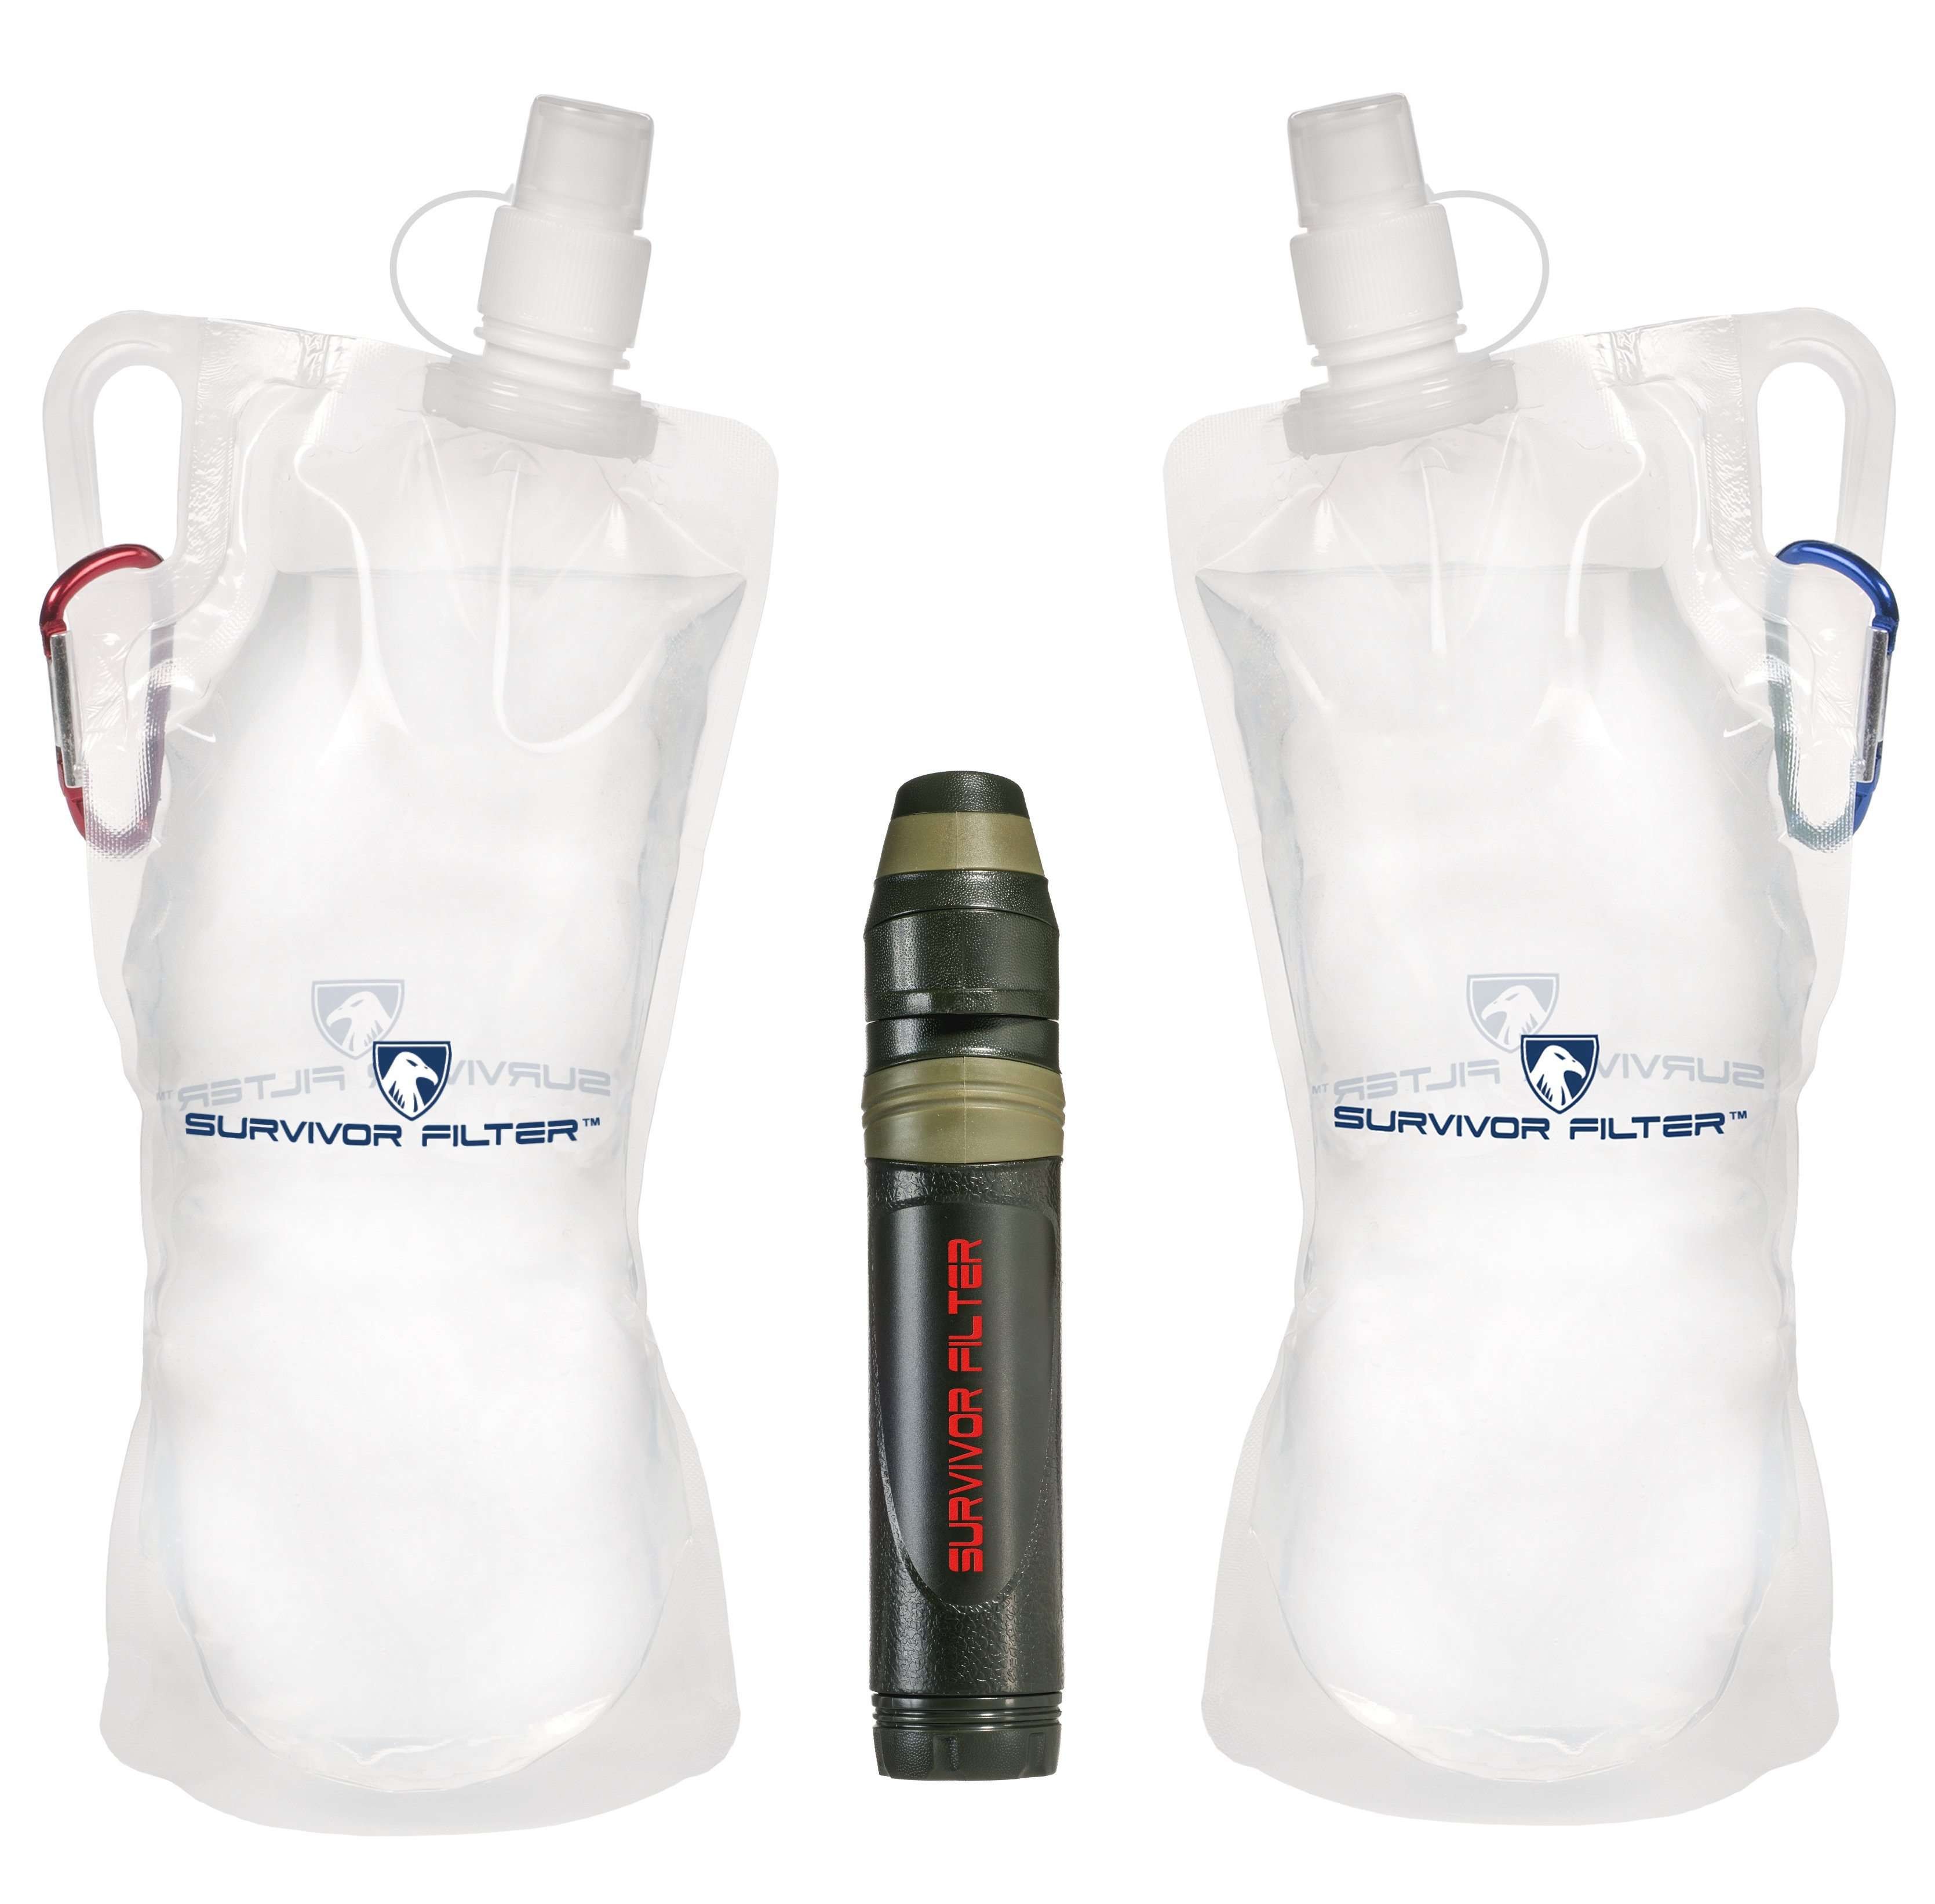 Survivor Filter Clear Collapsible Water Bottle Canteens - Travel Water Bottle - Includes Carabiners - Use with Our Straw Filter or as Foldable Water Bottles - BPA Free - White - 2 x 33oz / 1 Liter